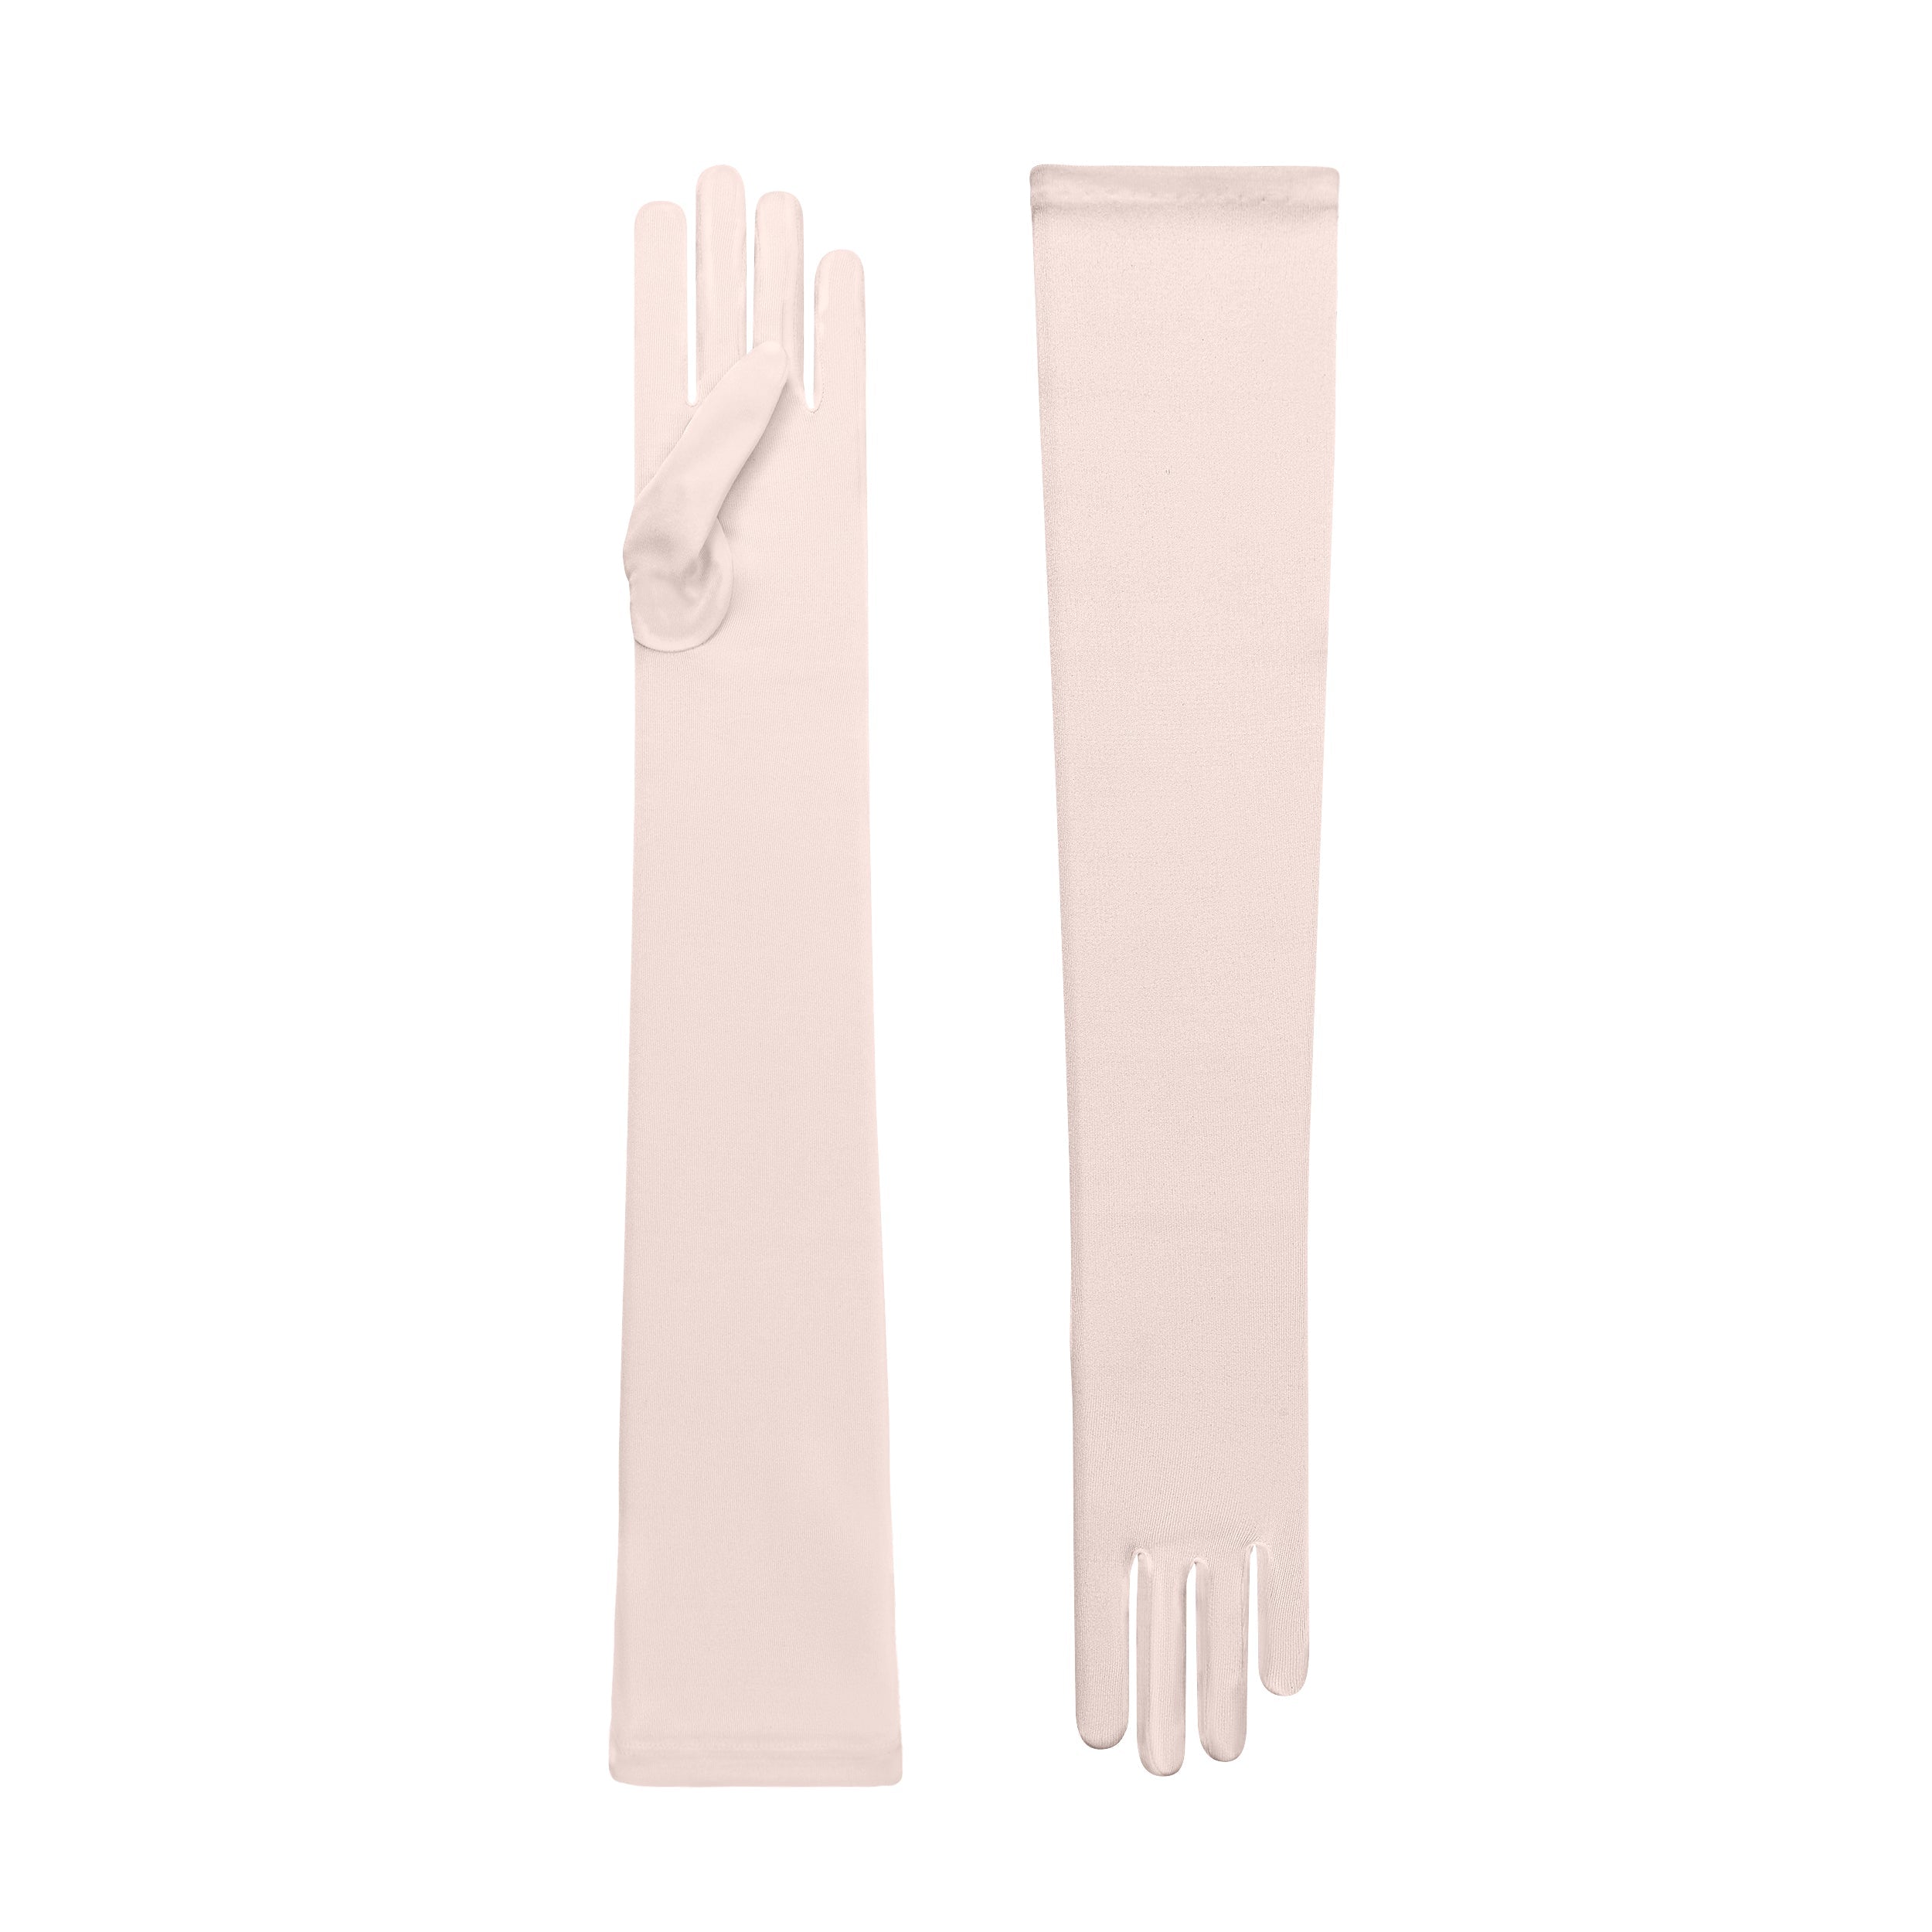 Cornelia James - Pink Silk Opera Gloves - Phoebe - Size Large (8½) - Made to Measure Evening Gloves by Cornelia James product